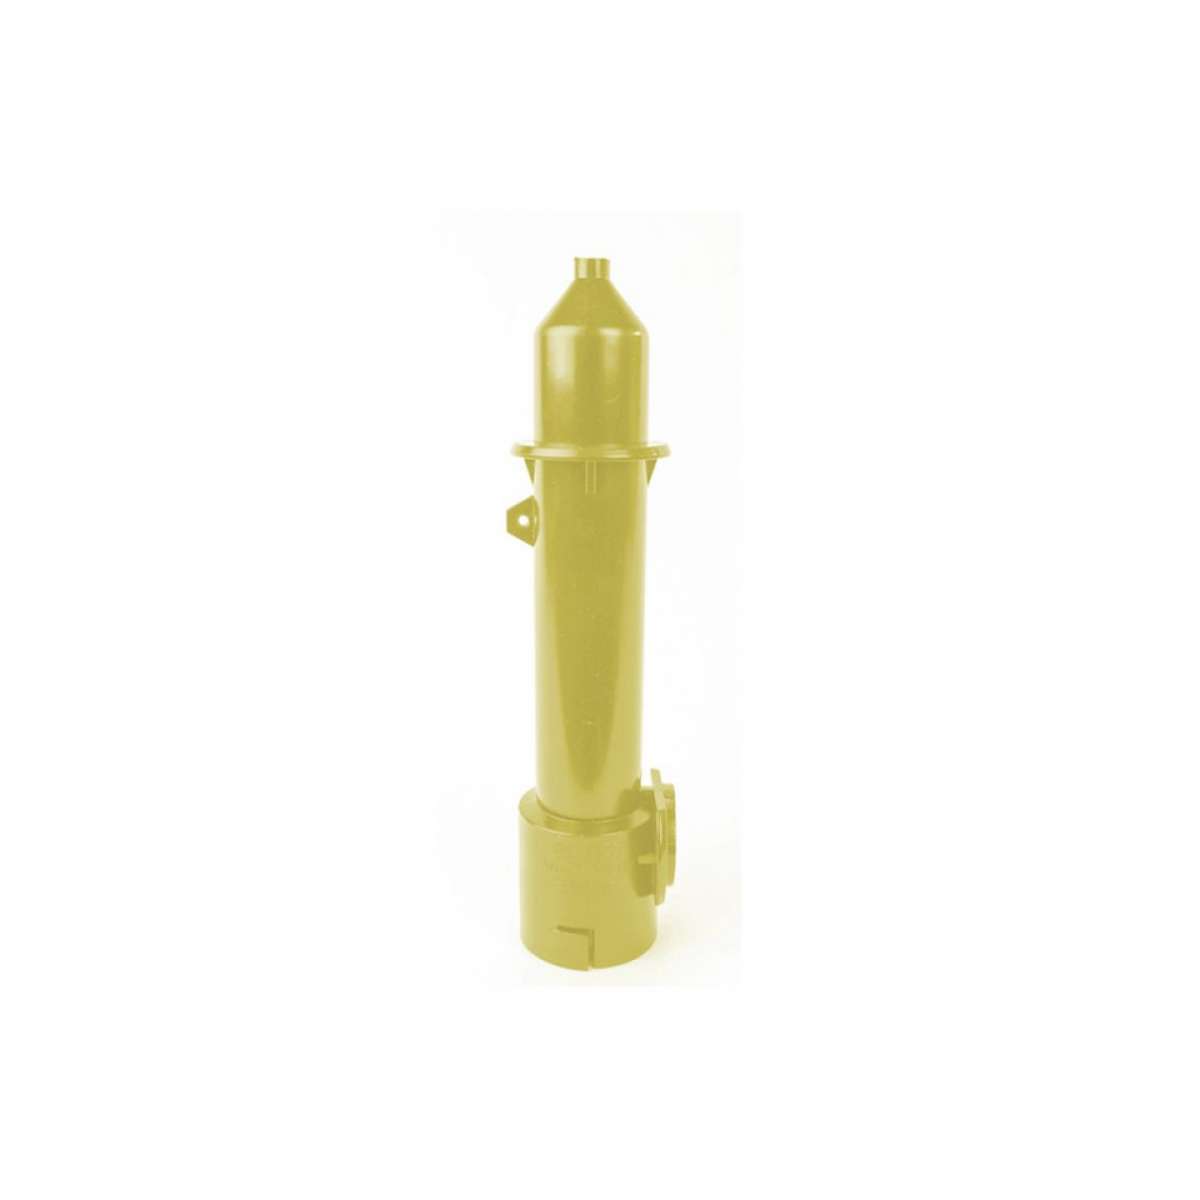 IsoLink 8" Rigid Spout with 1/4" Tip - Beige